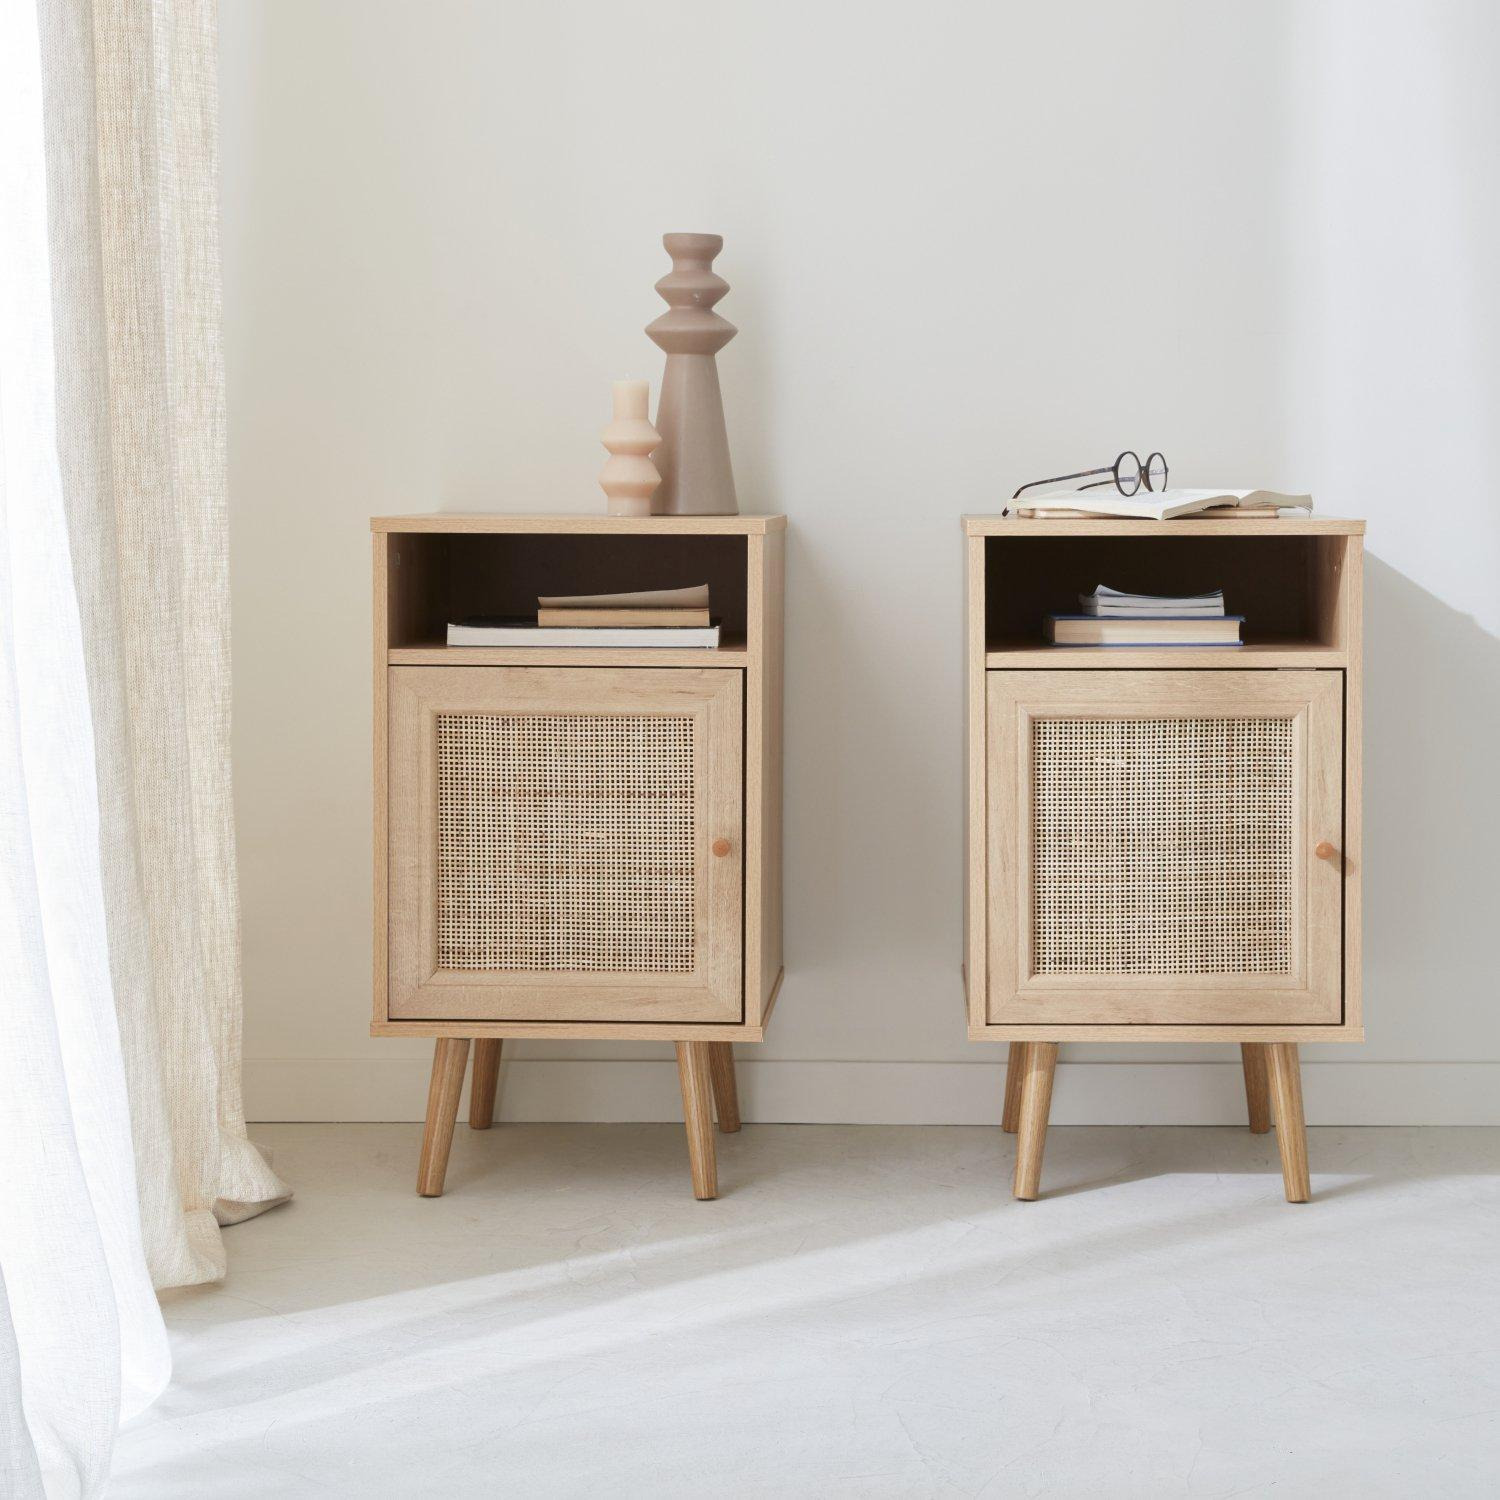 Pair Of Scandi-style Wood And Cane Rattan Bedside Tables With Cupboard - image 1